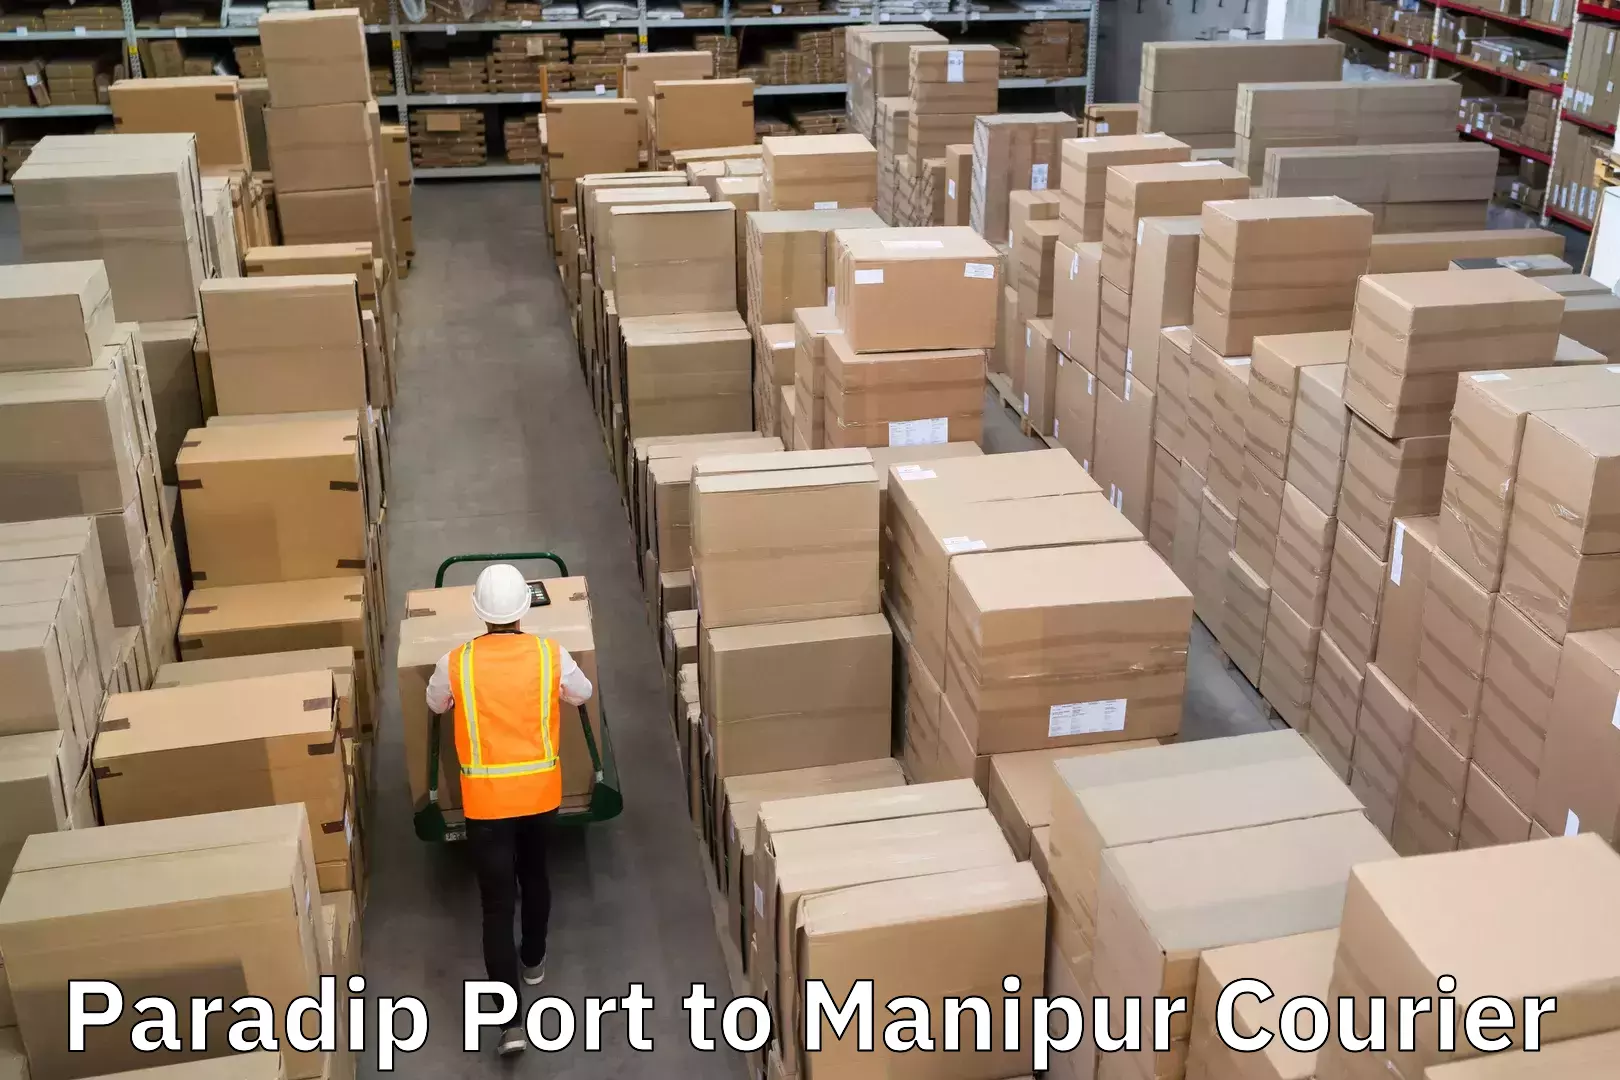 Courier service booking Paradip Port to Imphal